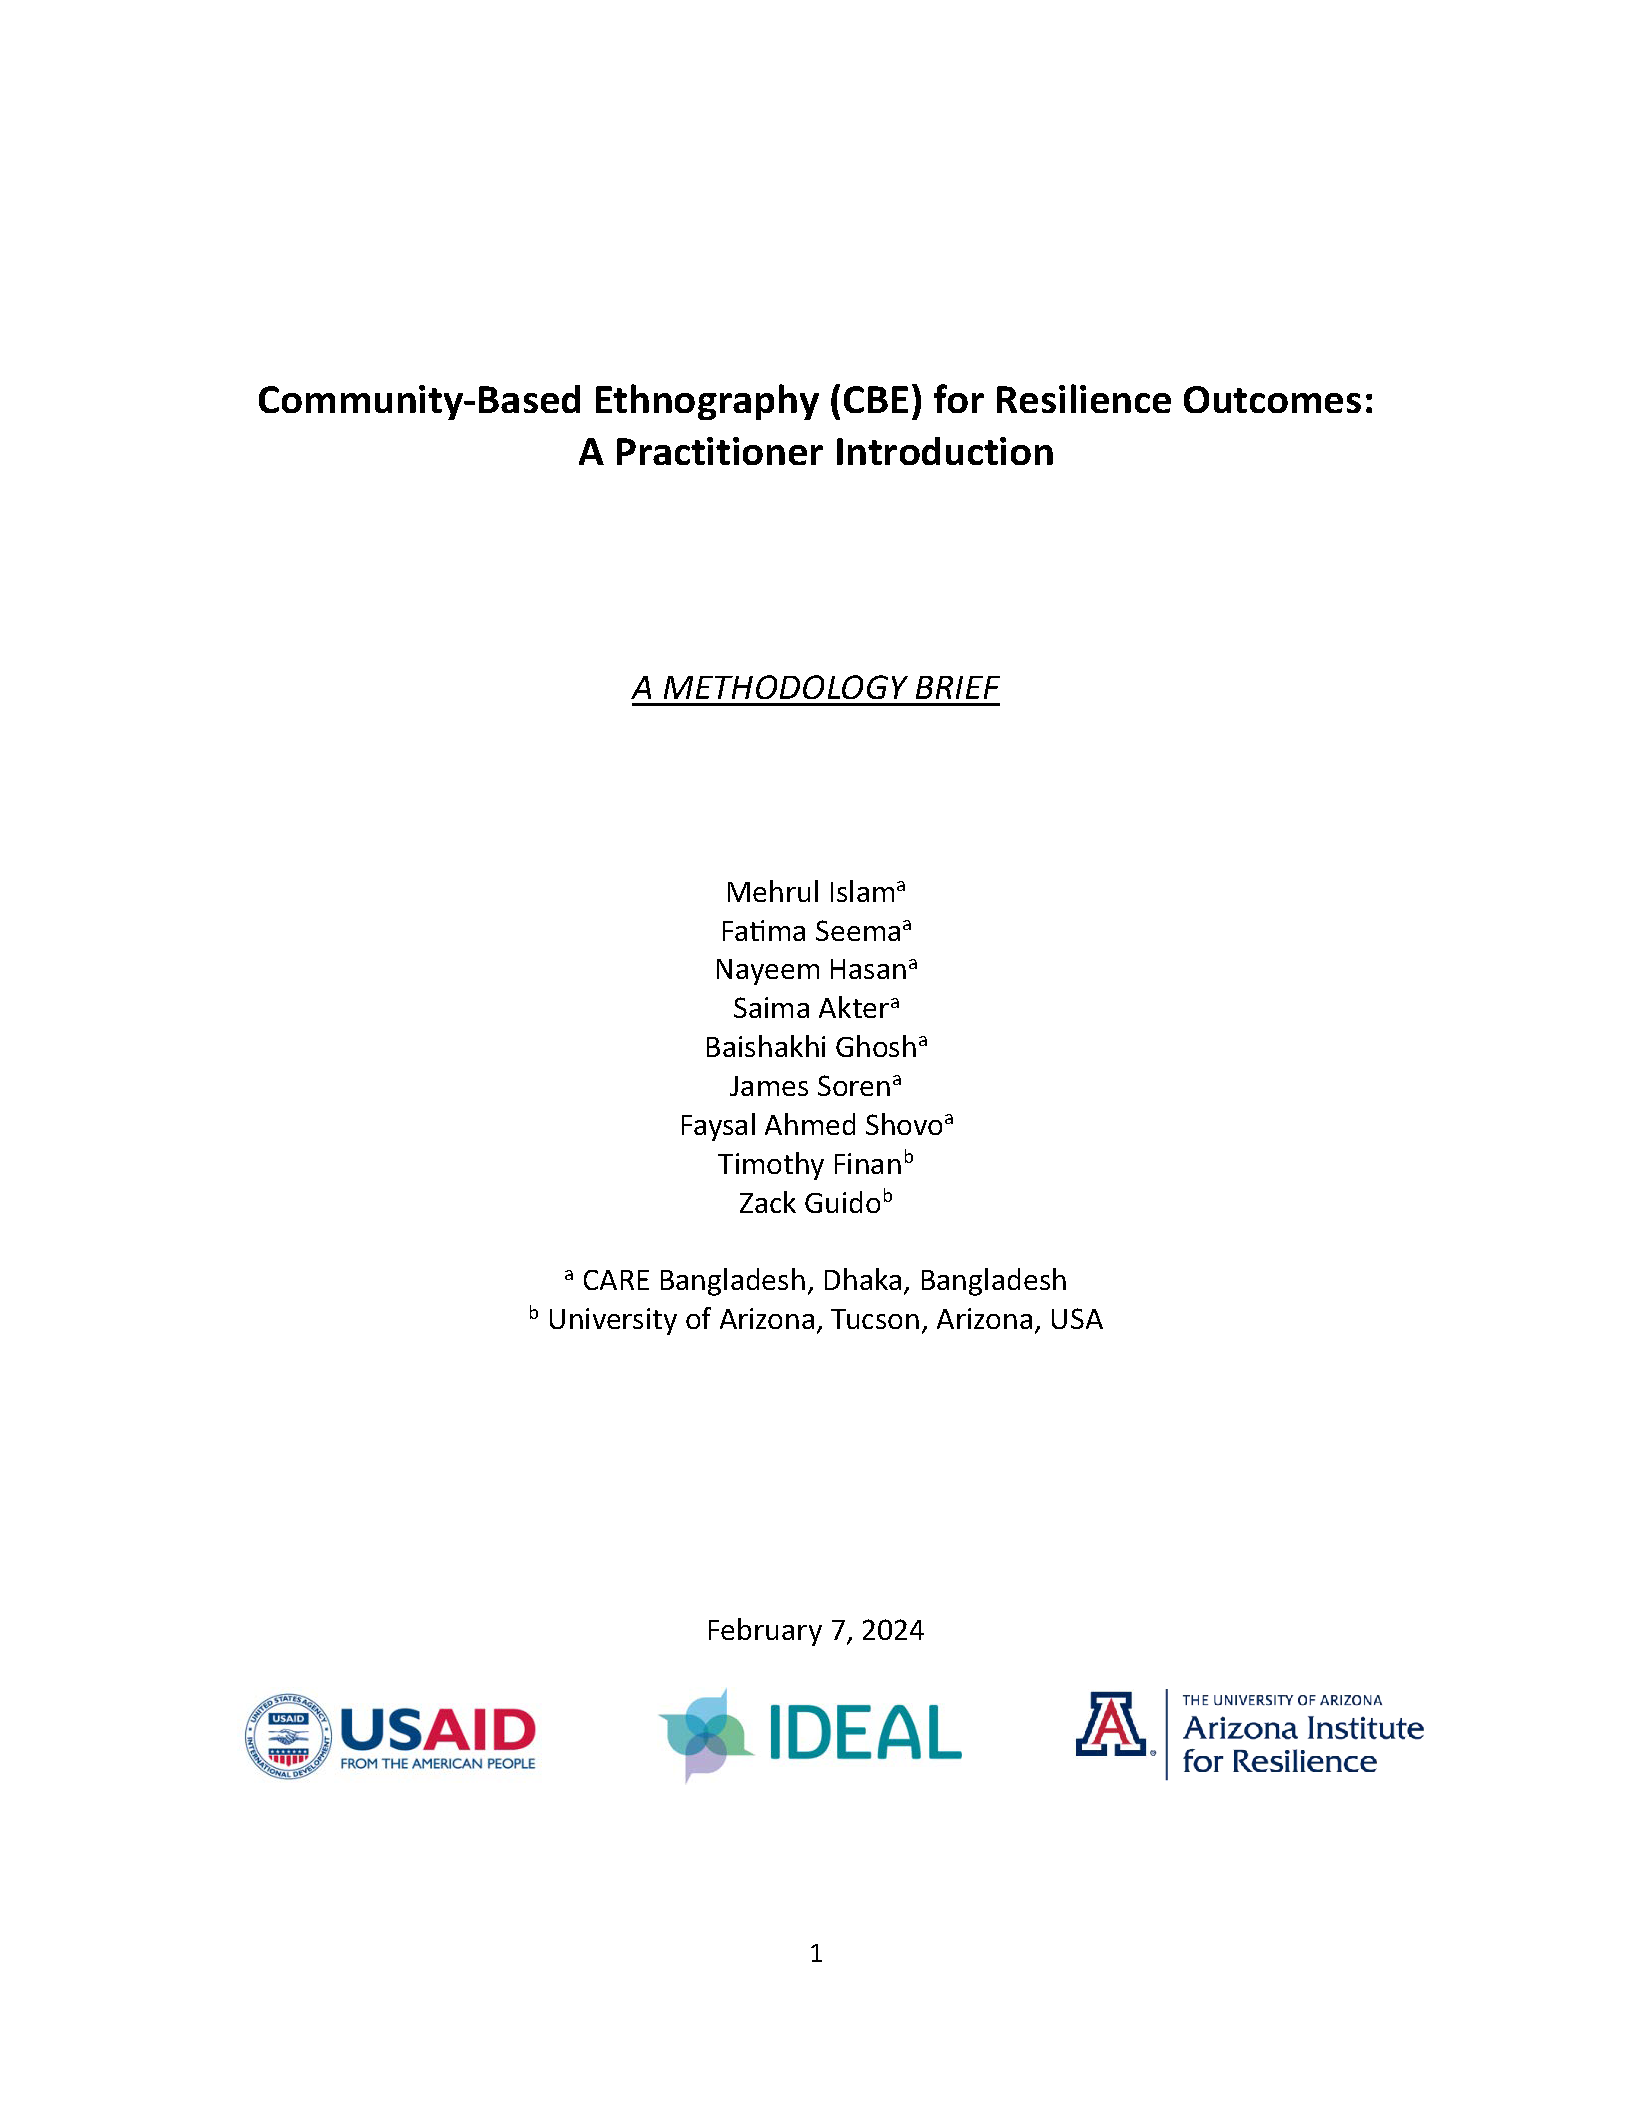 Cover page for Community-Based Ethnography (CBE) for Resilience Outcomes: A Practitioner Introduction